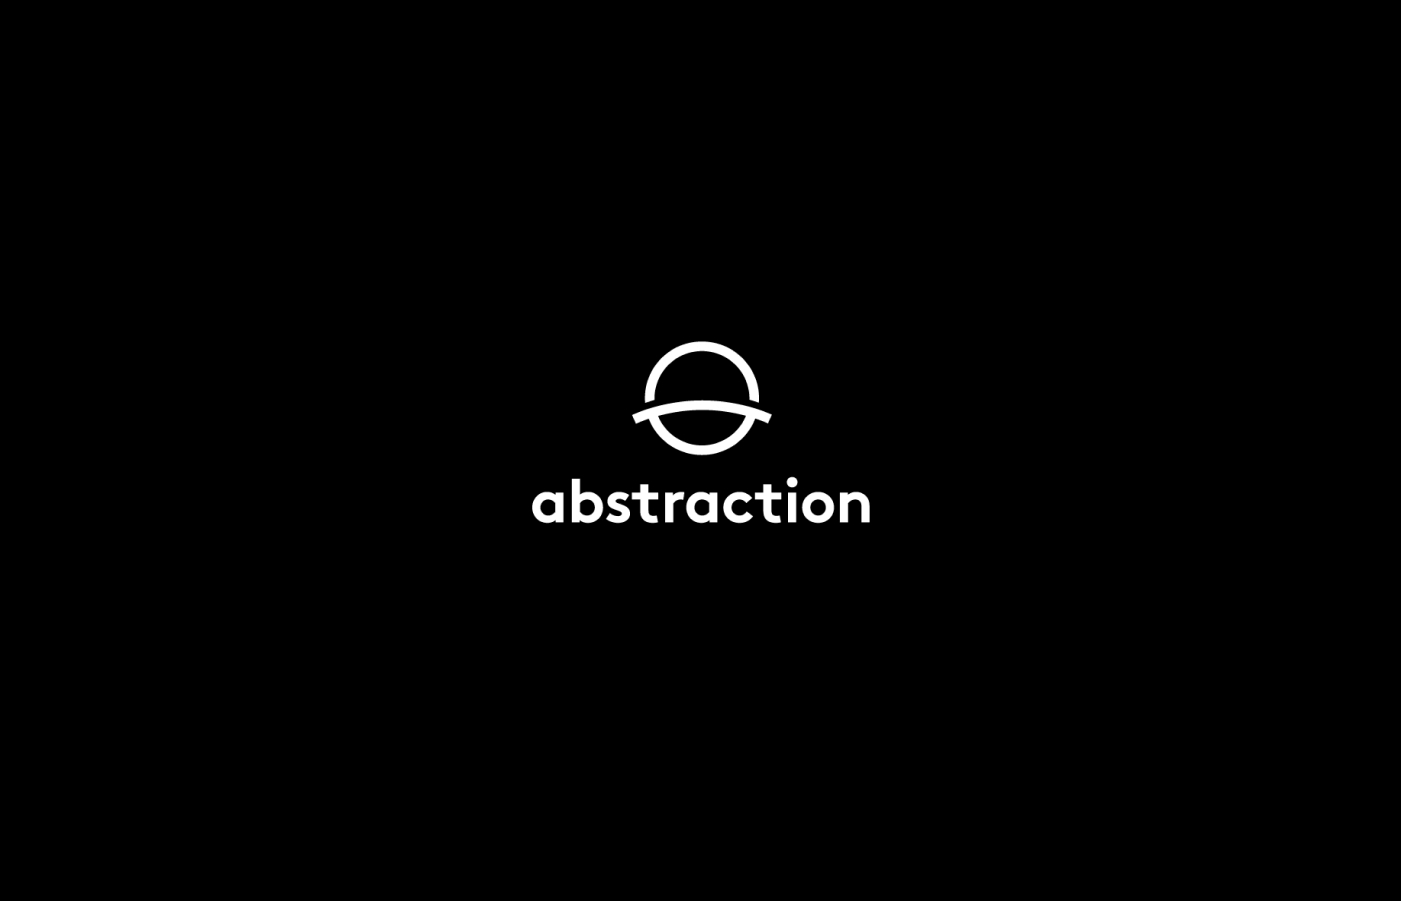 Abstraction Games - Creative Video Game Studio